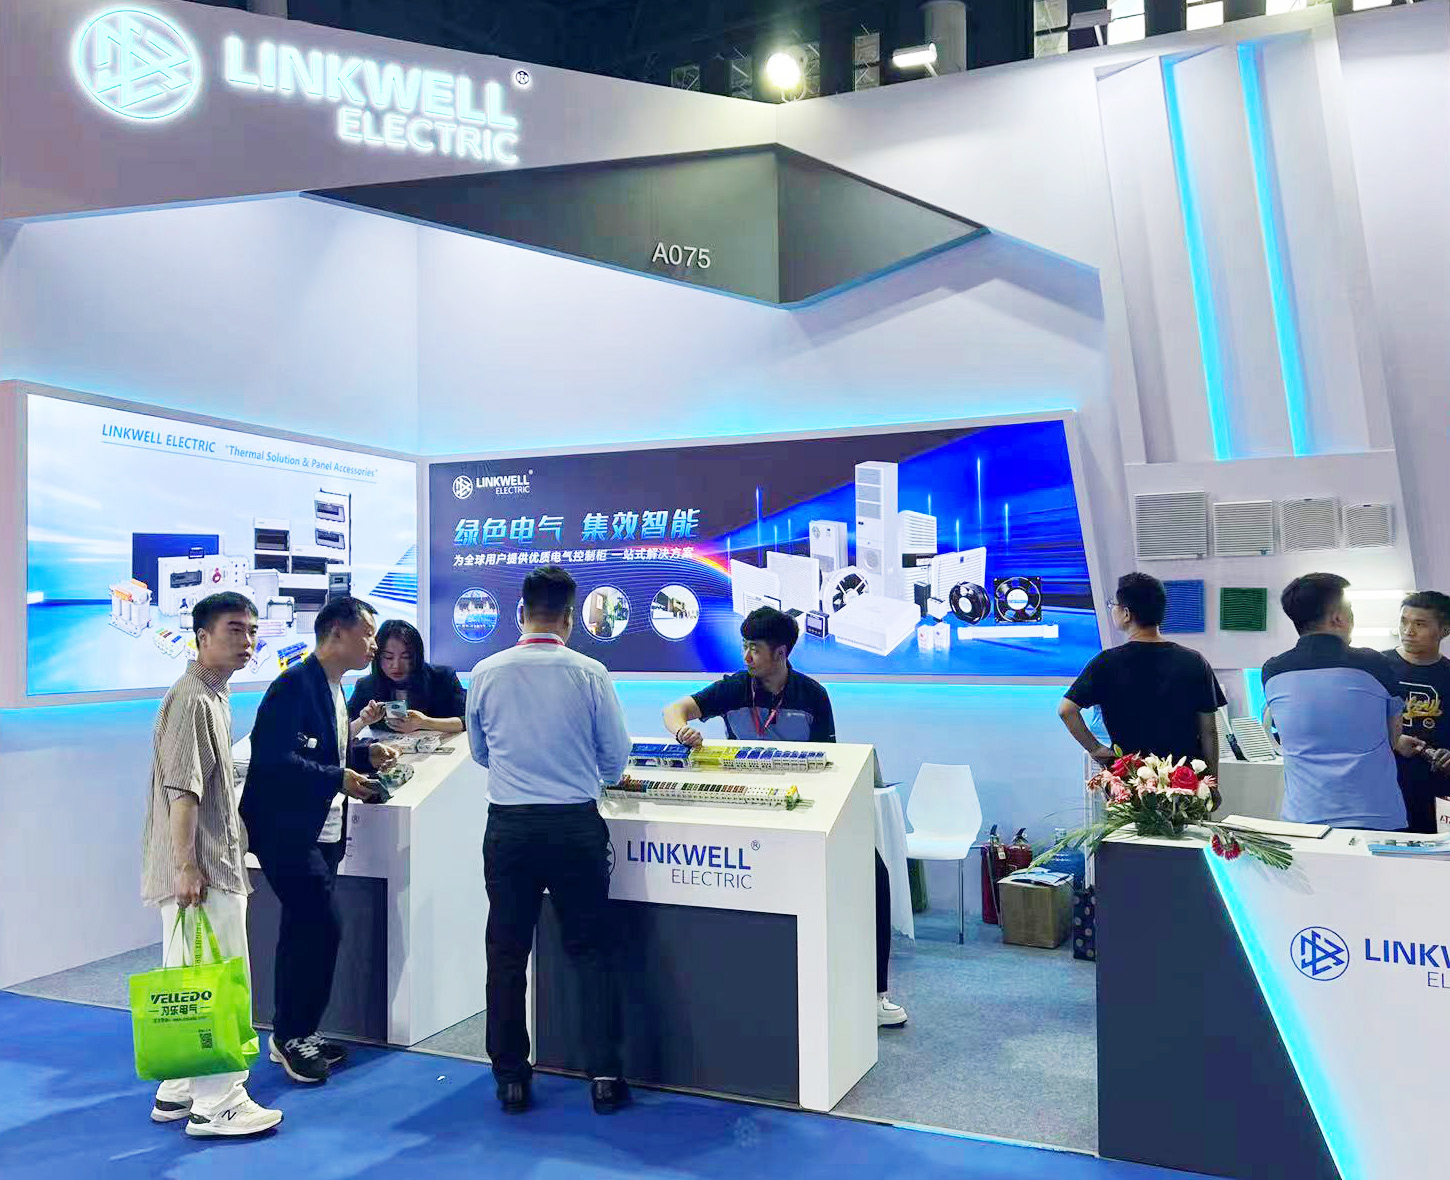 he 3rd China Chengdu Industrial Expo: LINKWELL Talks about Future Manufacturing